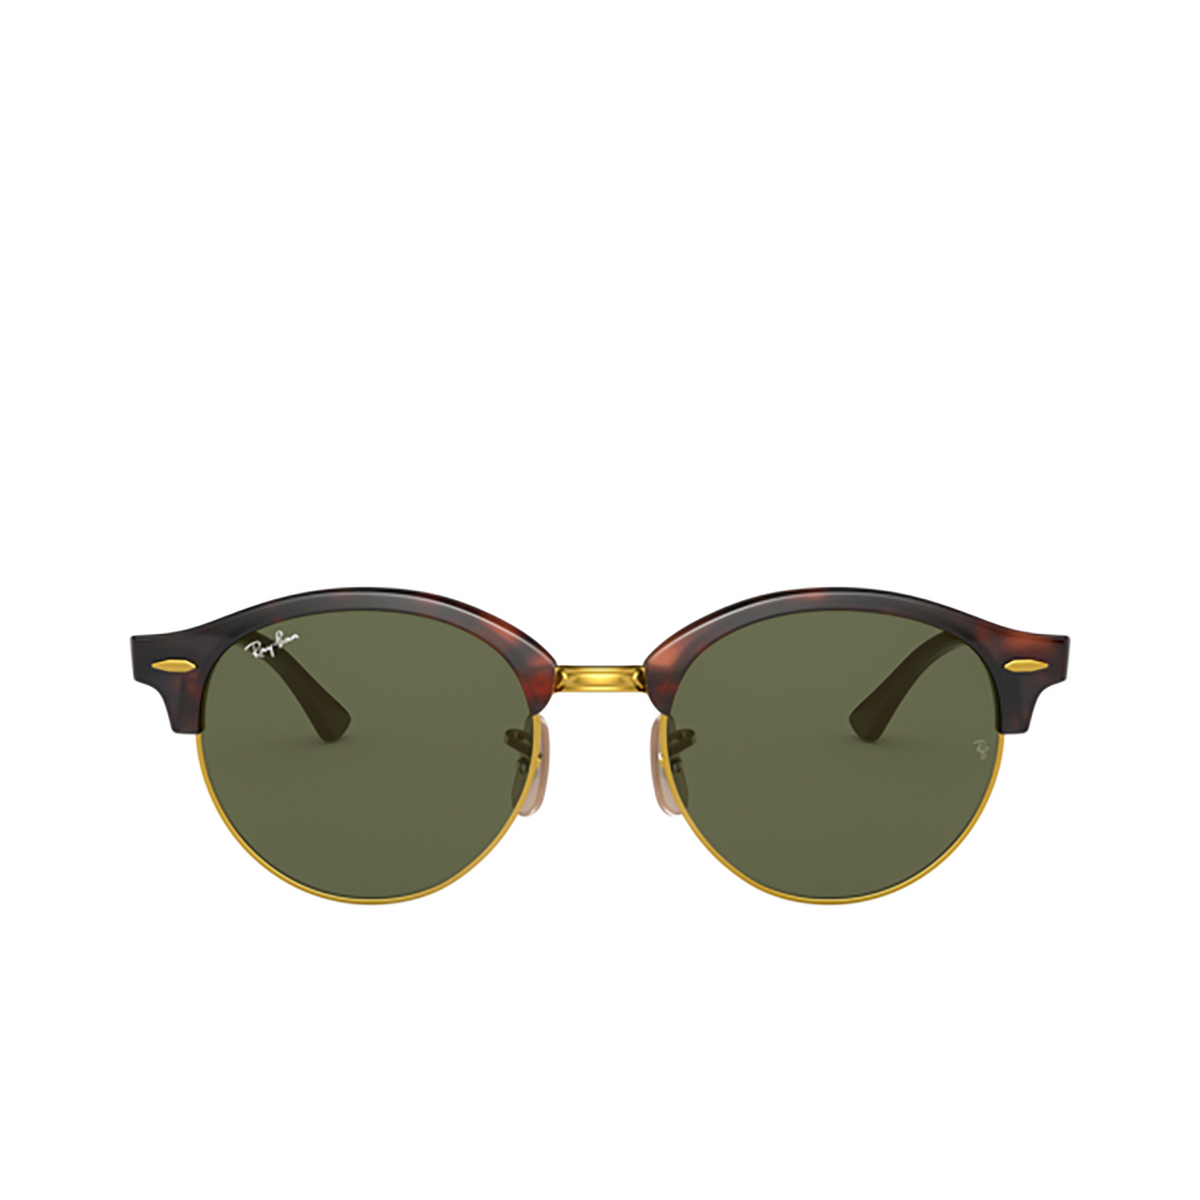 Ray-Ban CLUBROUND Sunglasses 990 RED HAVANA - front view